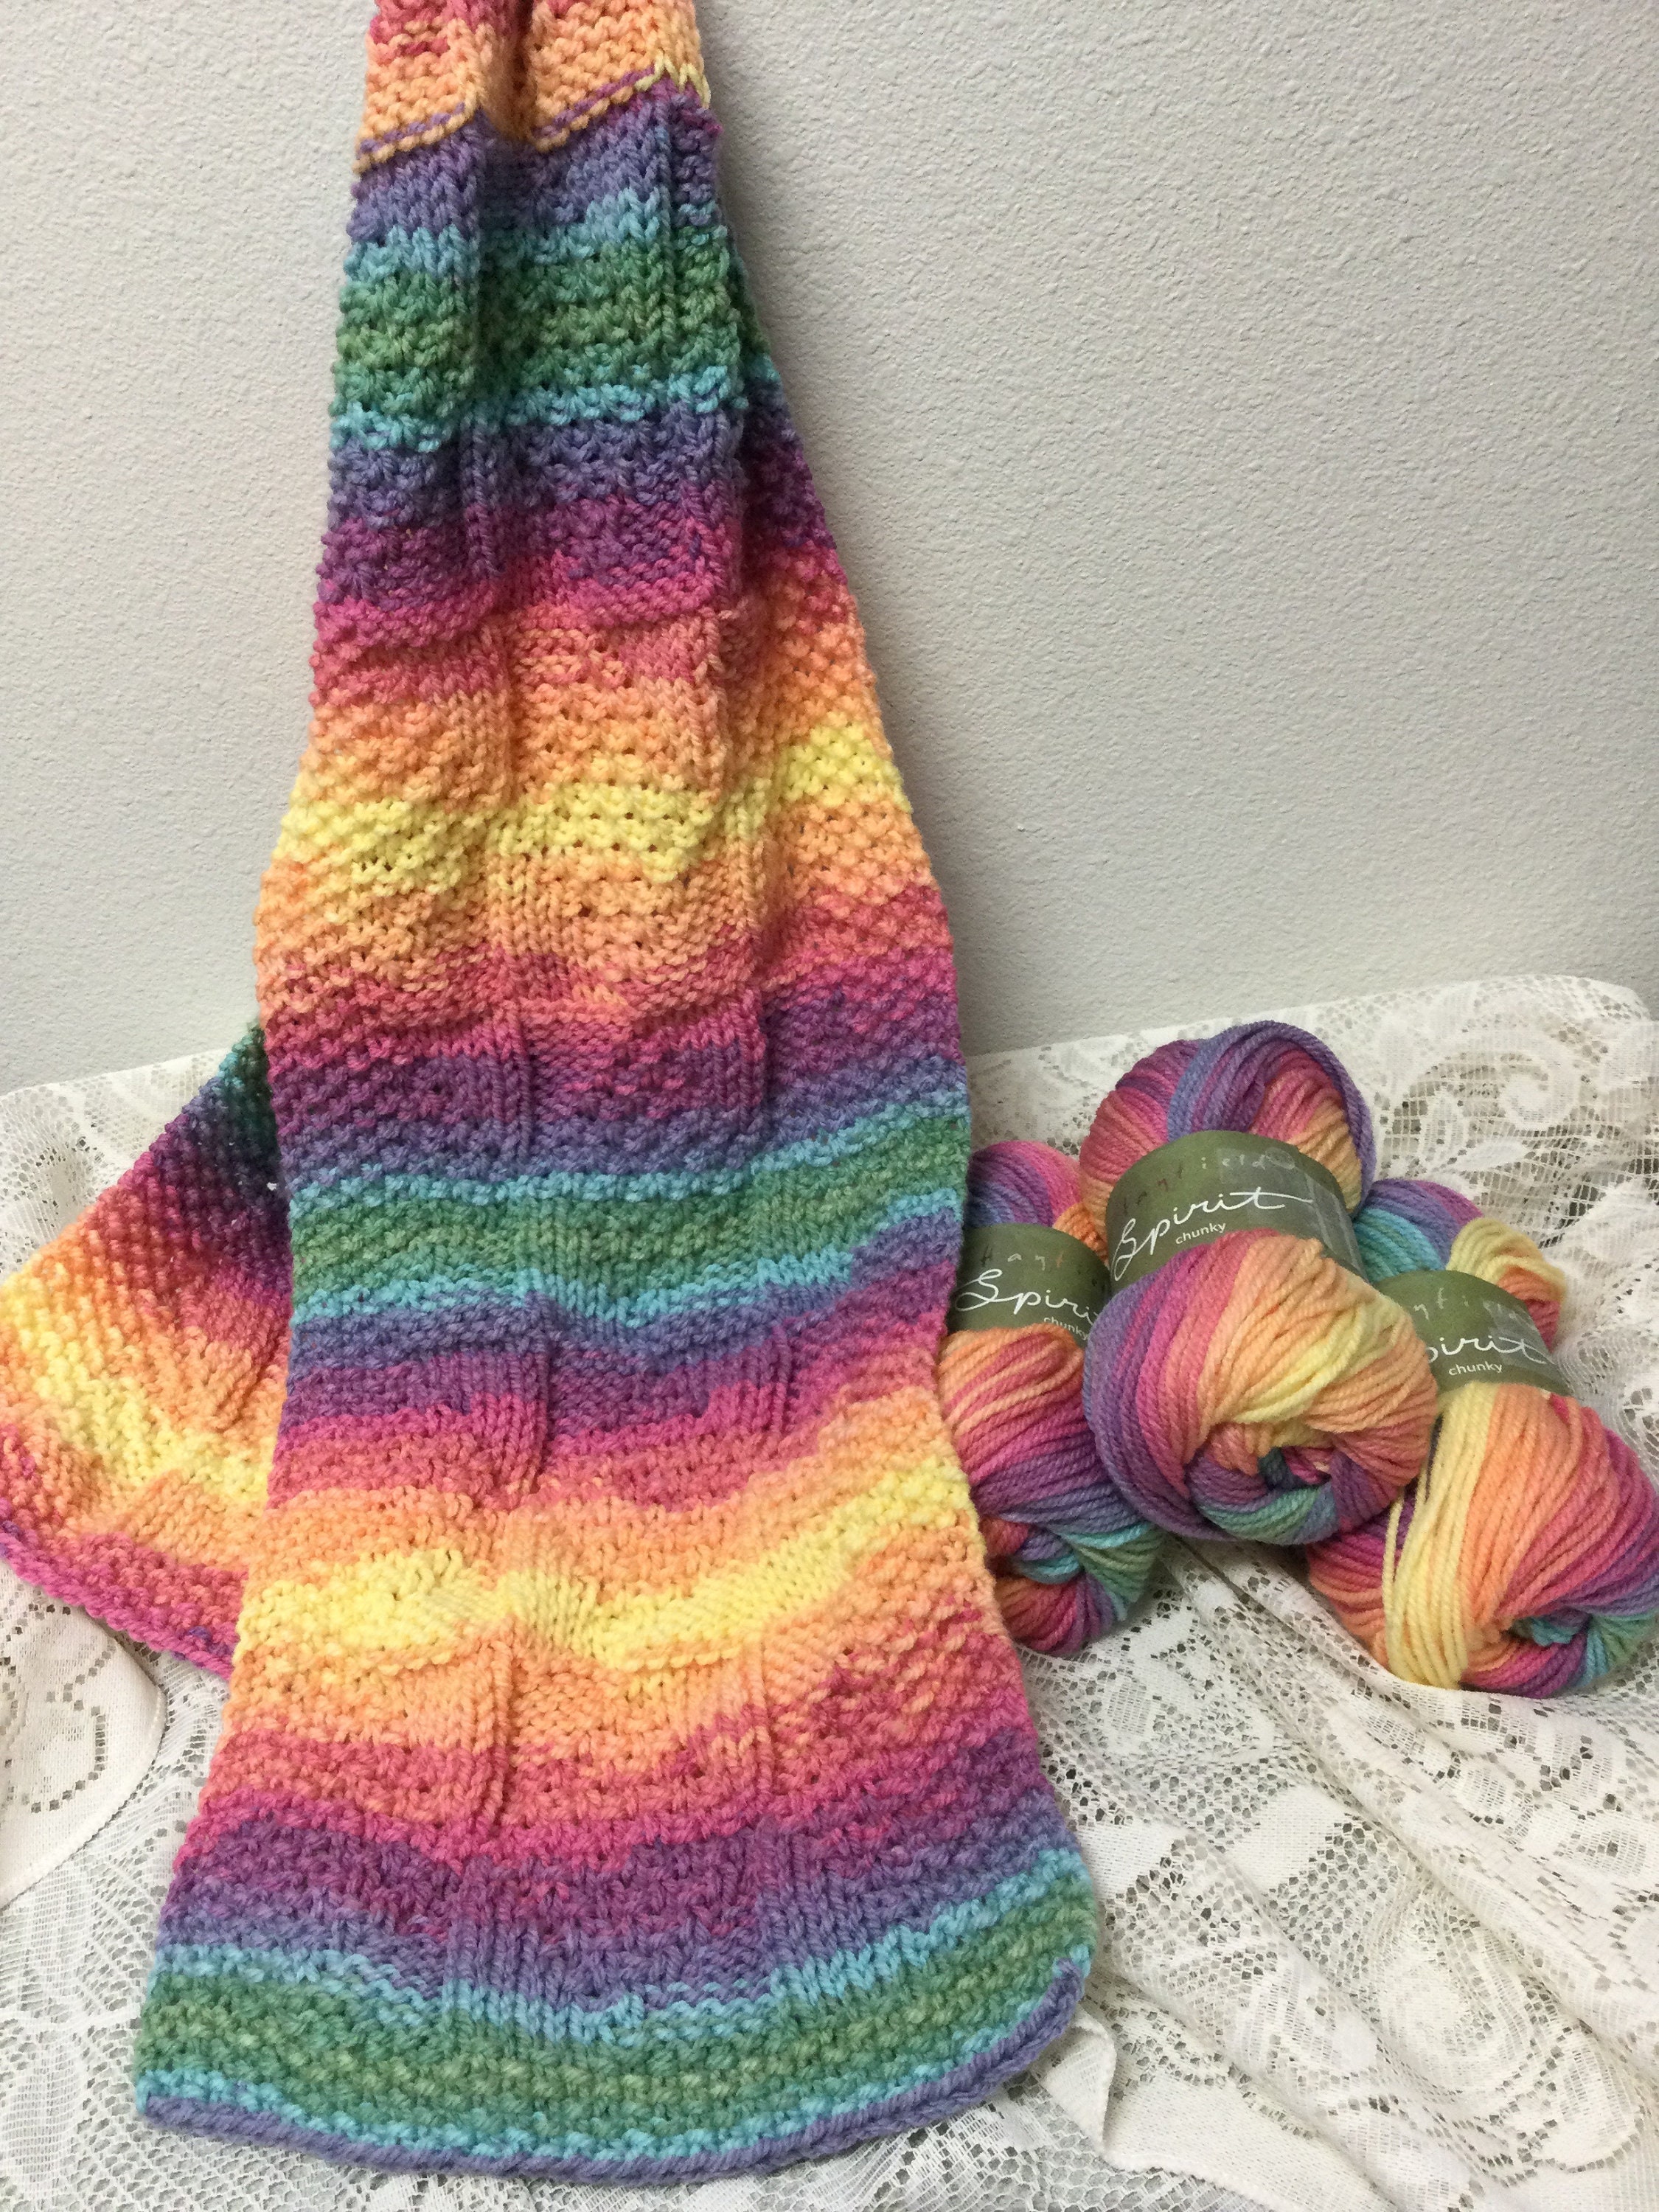 What Is Your Animal Spirit? Yarn Review